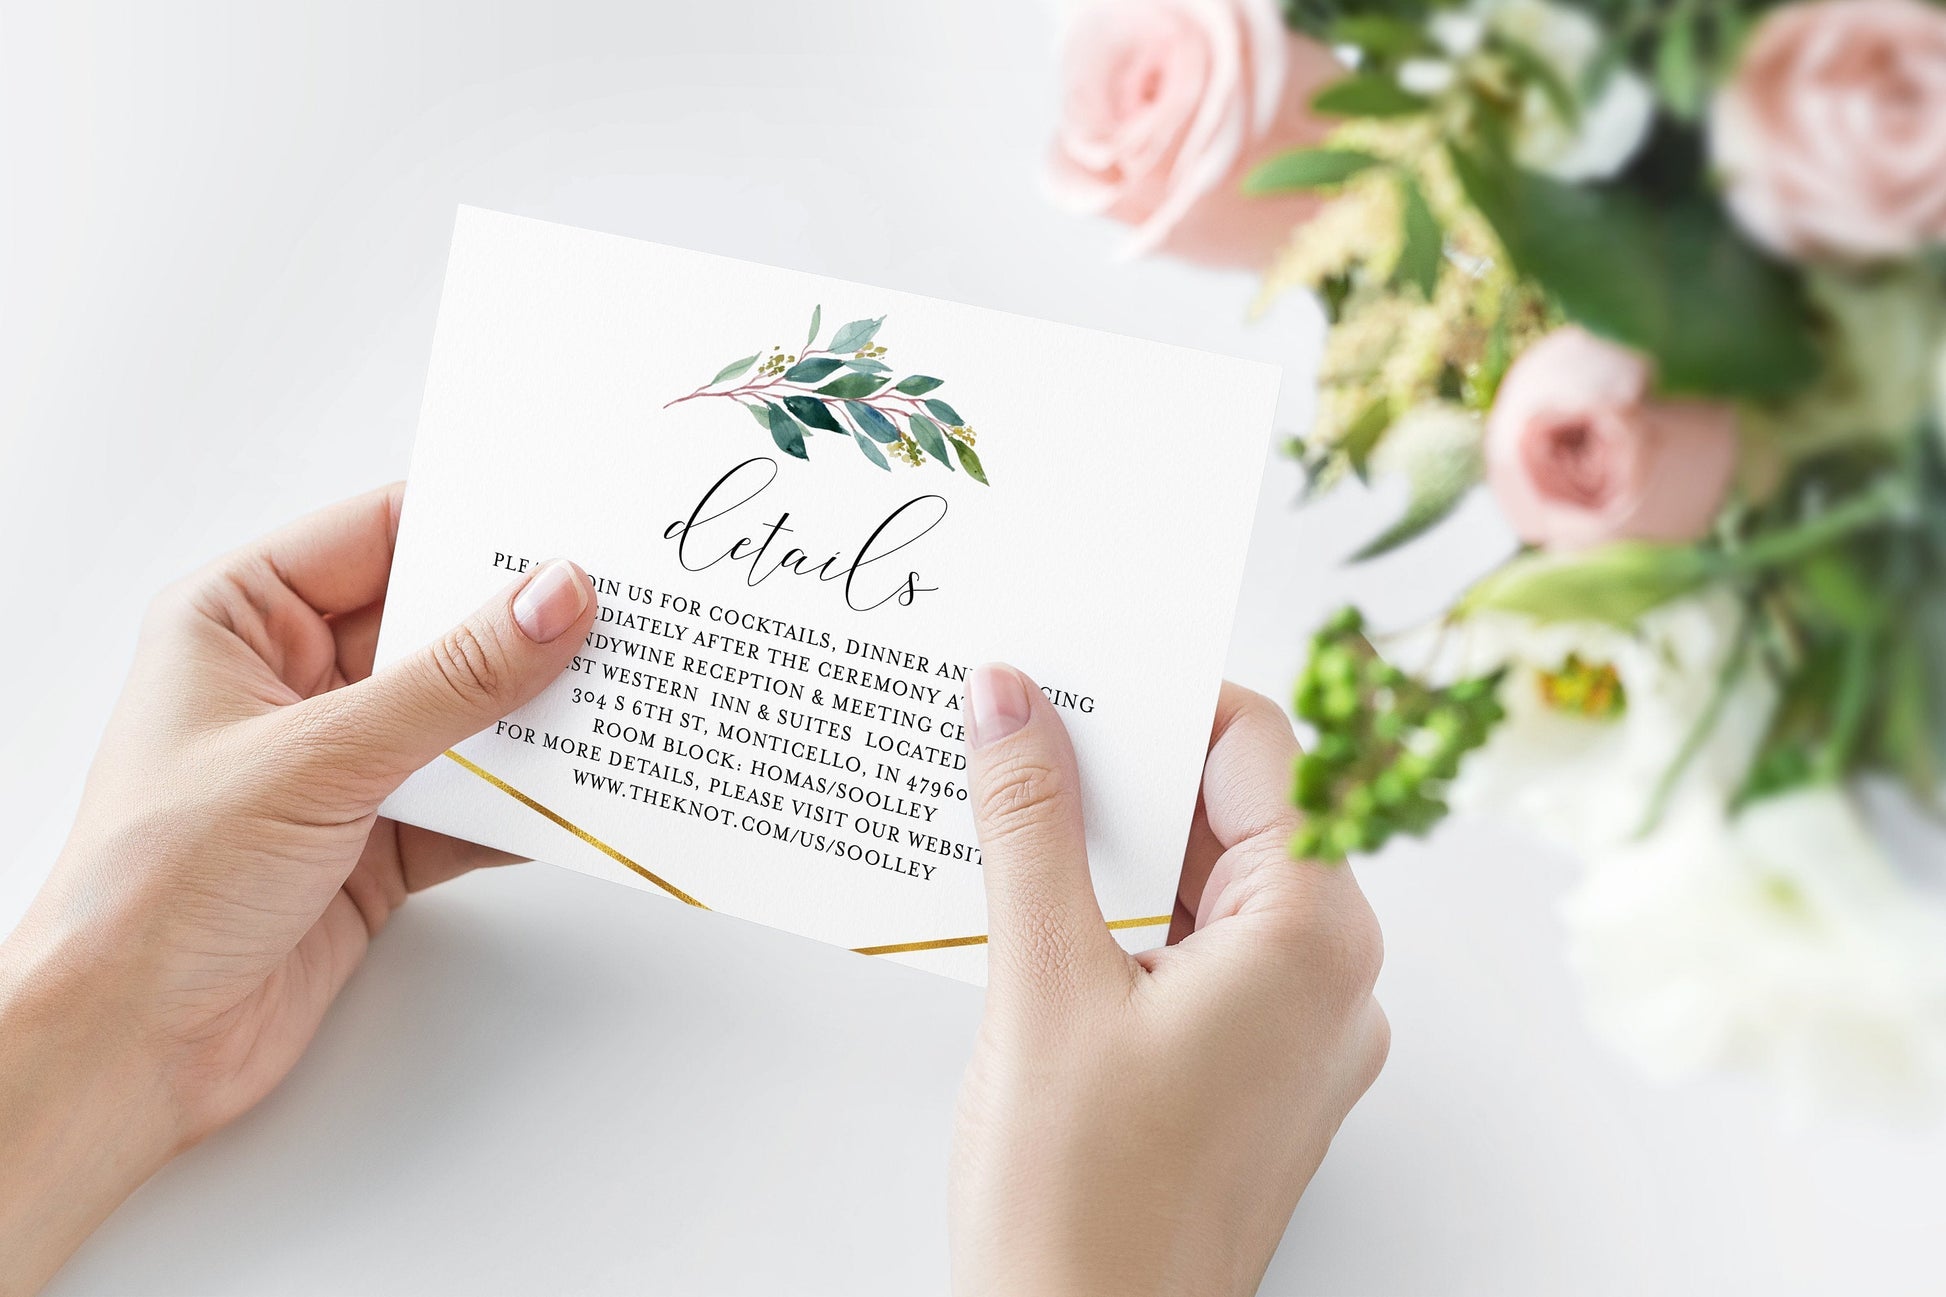 Wedding Details Card Template Instant Download Information Card Wedding Info Card Greenery Wedding Details Template  - Tara RSVP & DETAILS CARDS SAVVY PAPER CO